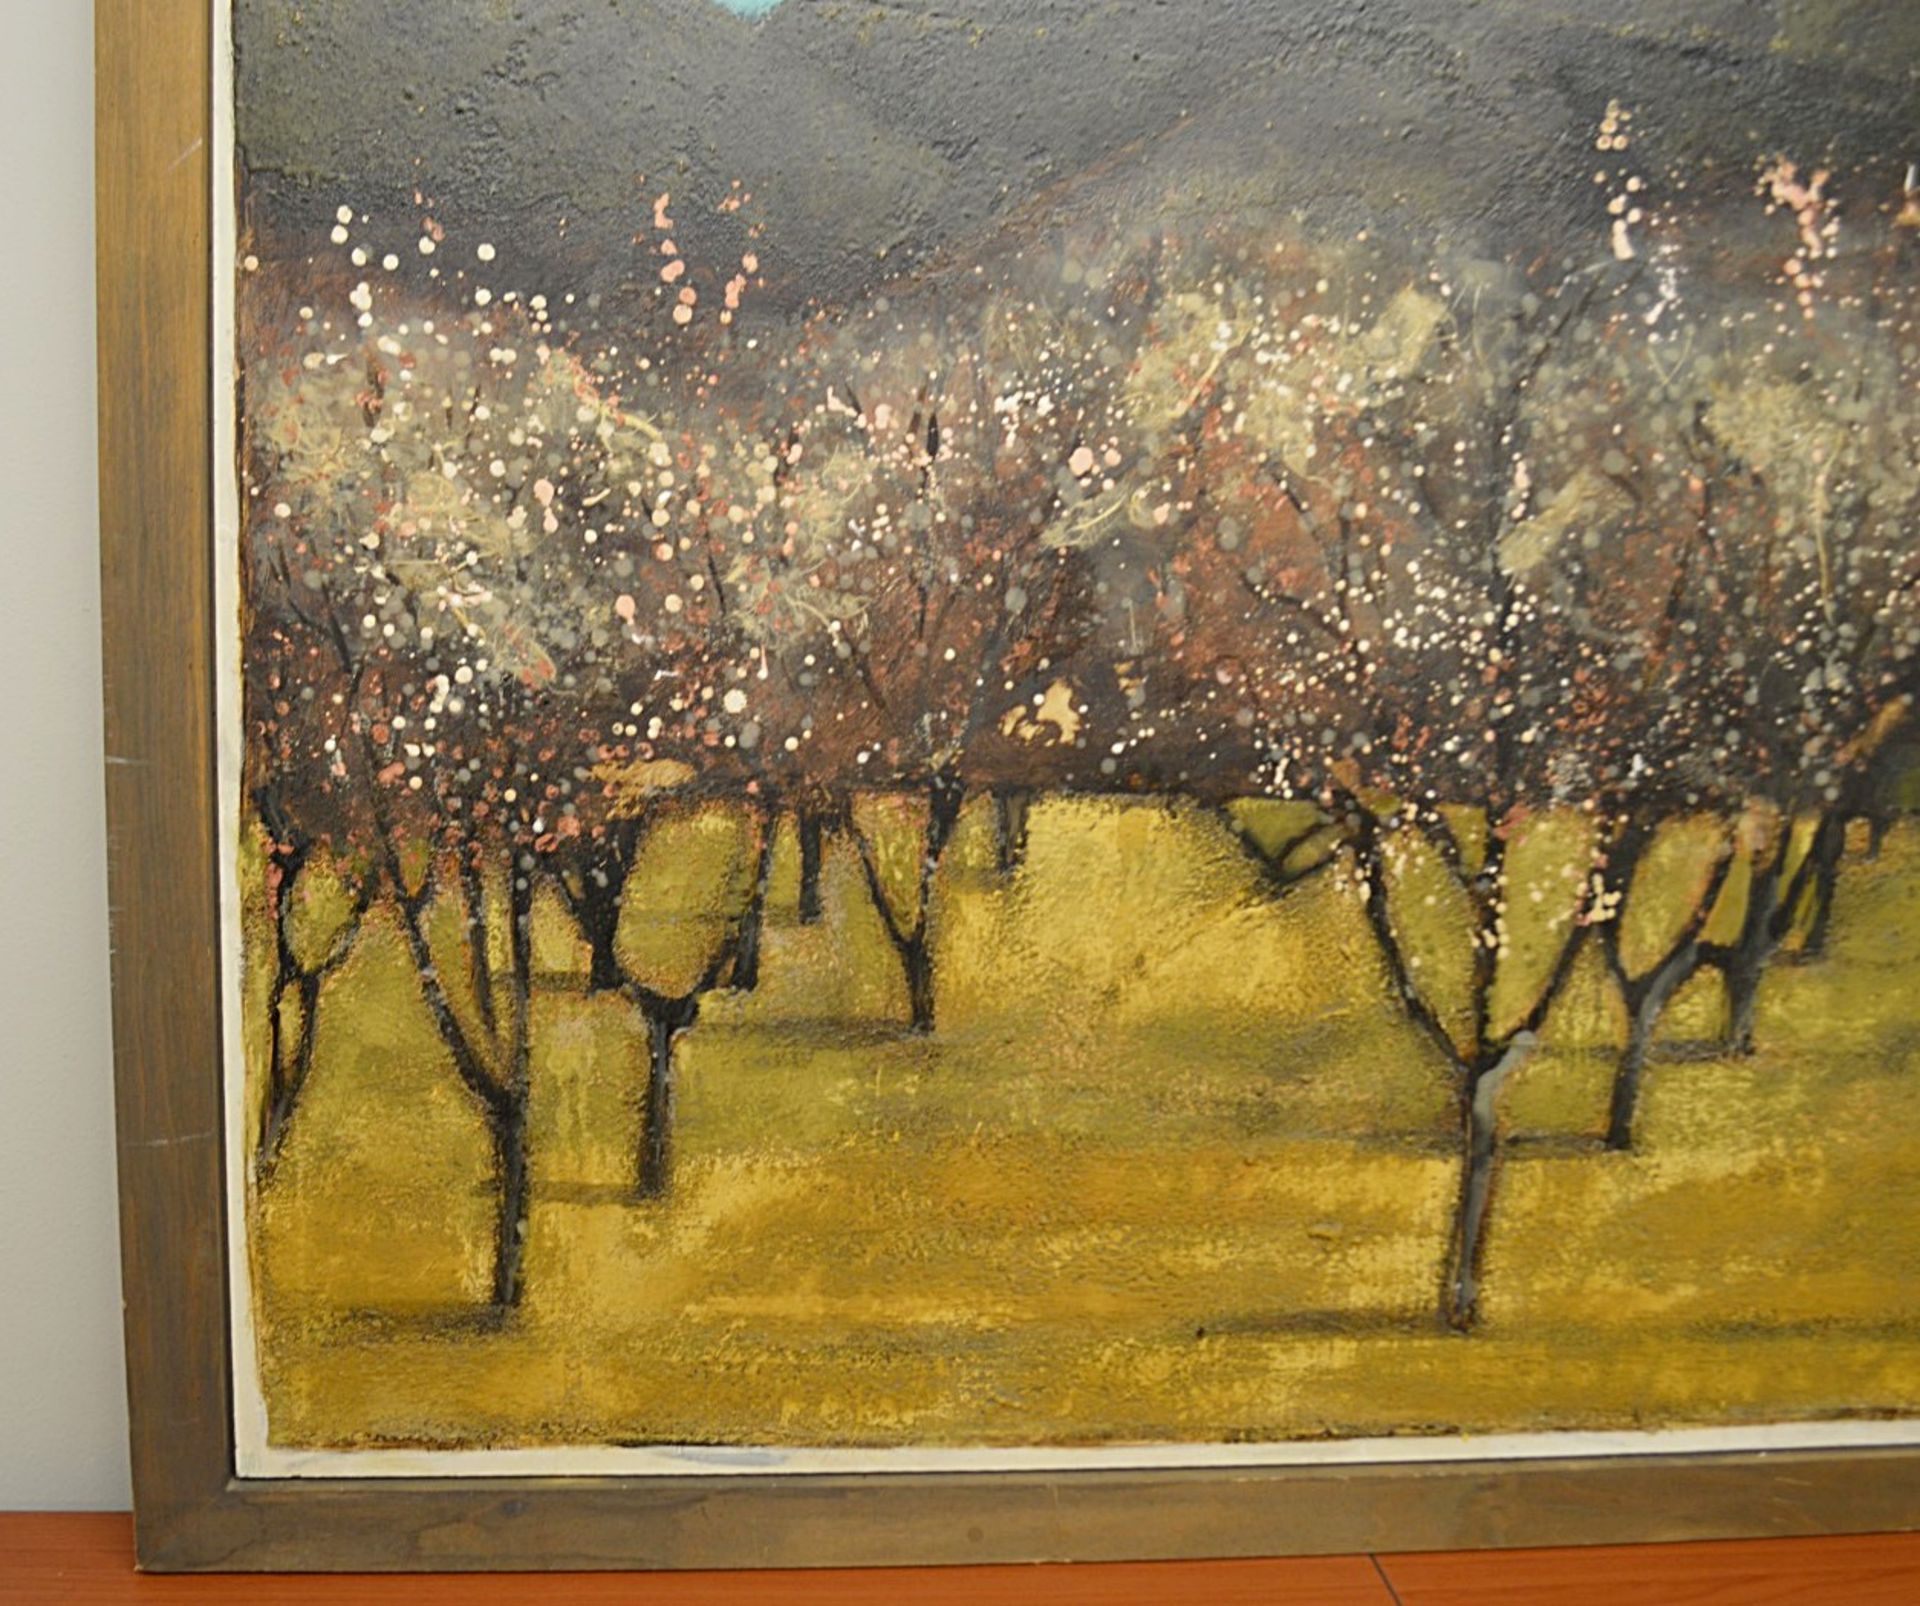 1 x Original Signed Framed Painting Of A Spanish Orchard By Lydia Bauman (1997) - Dimensions: 122 - Image 4 of 8